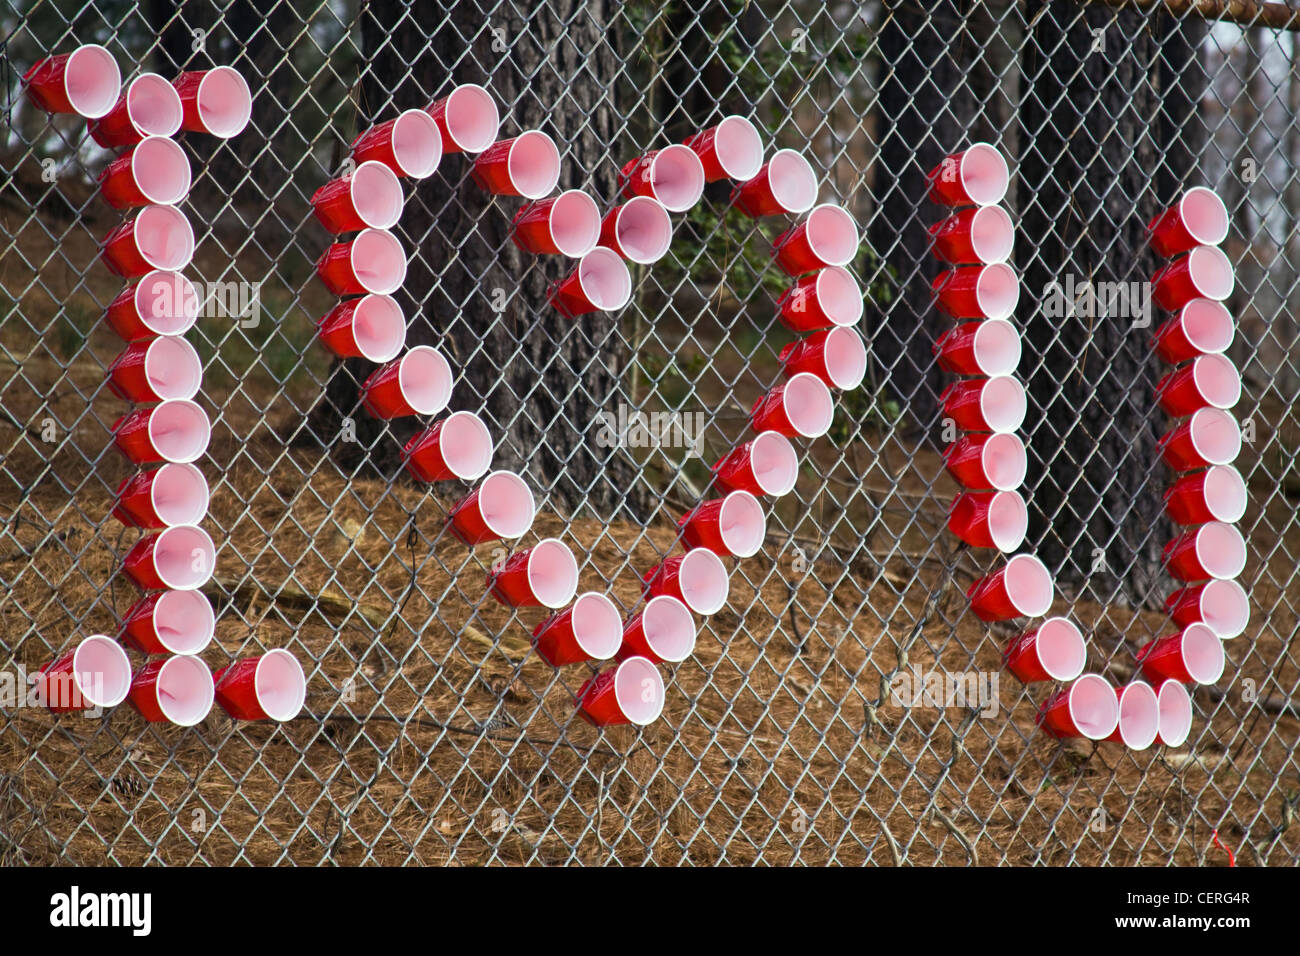 Using red and white plastic cups on a chain link fence to spell 'I Love You' at WT Woodson High School in Fairfax Virginia Stock Photo